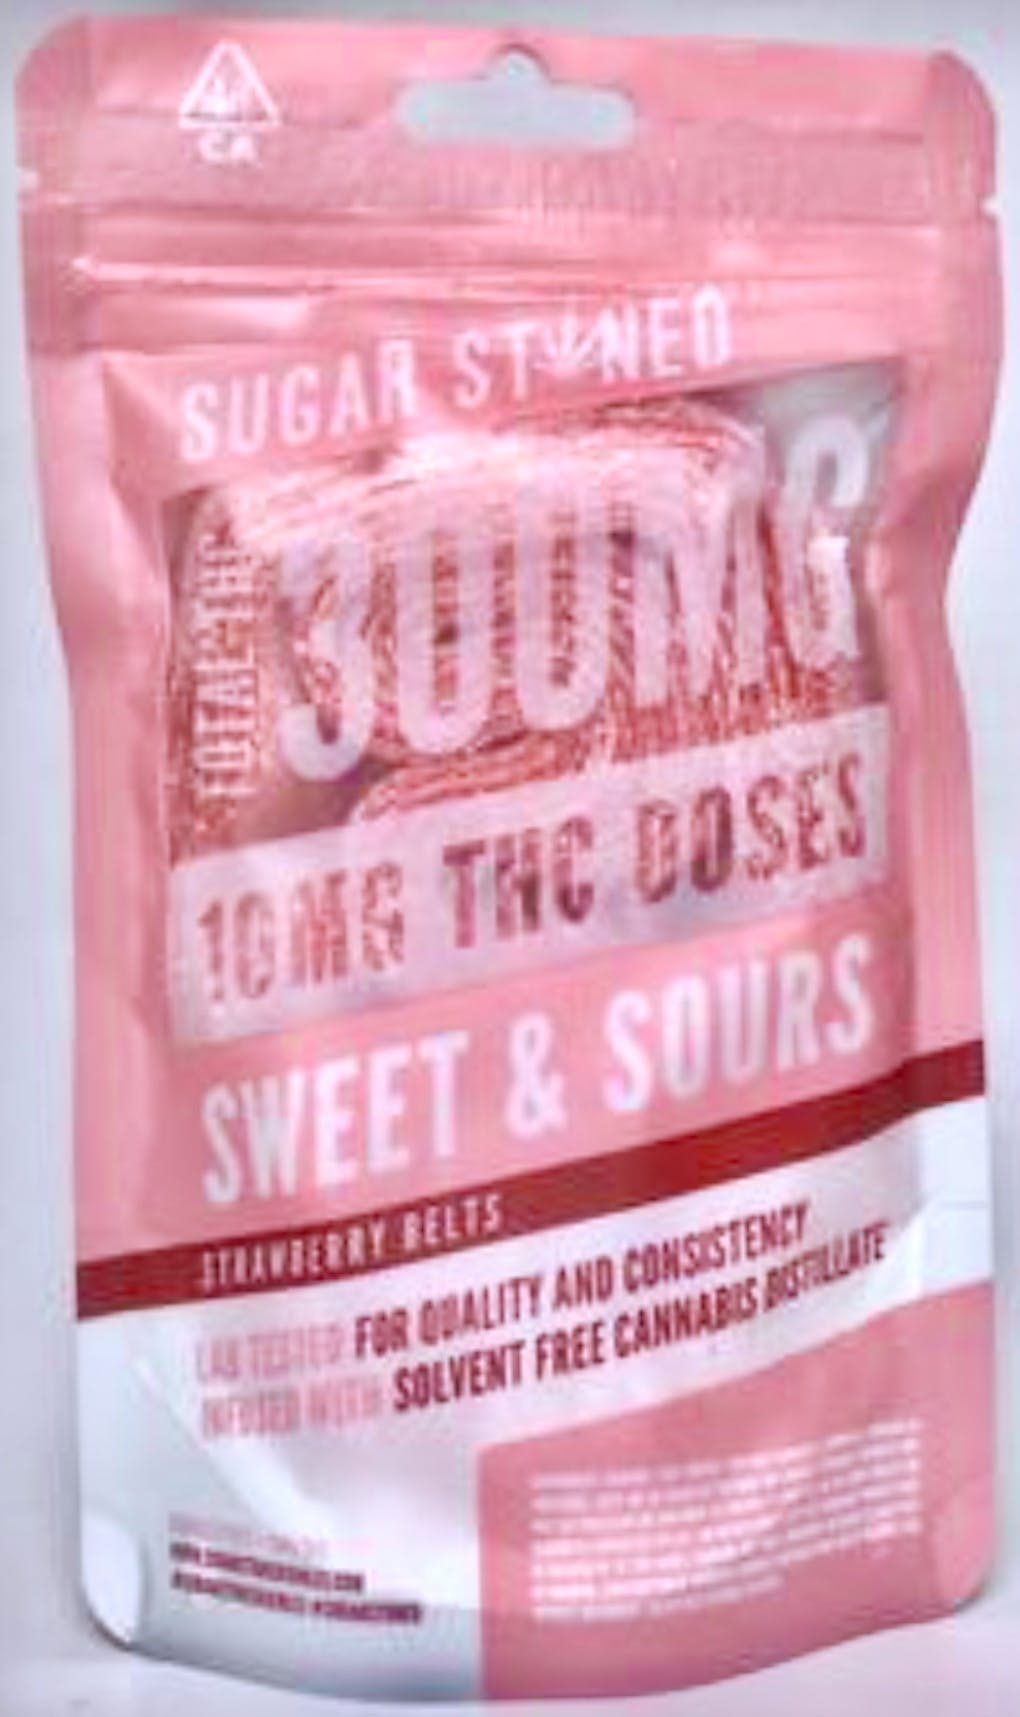 edible-sugar-stoned-strawberry-sour-belts-300mg